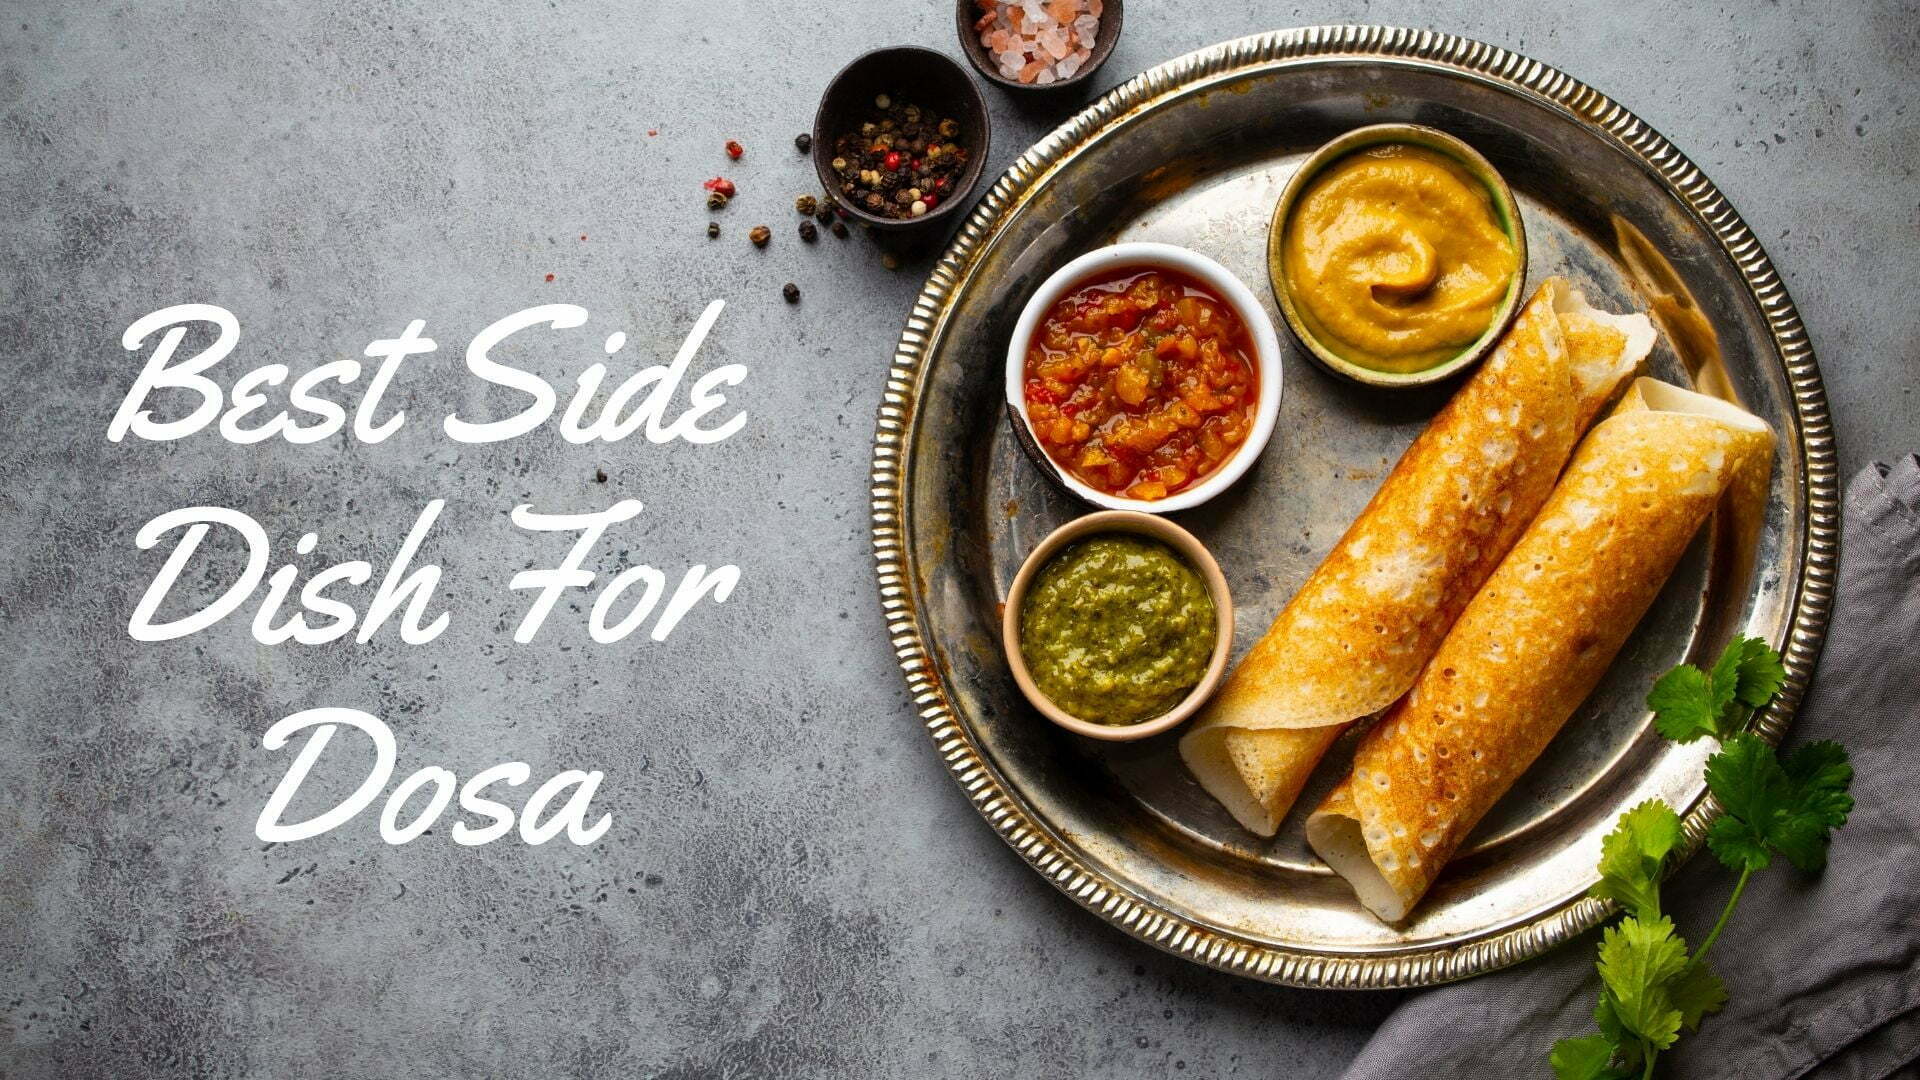 Best Side Dish For Dosa